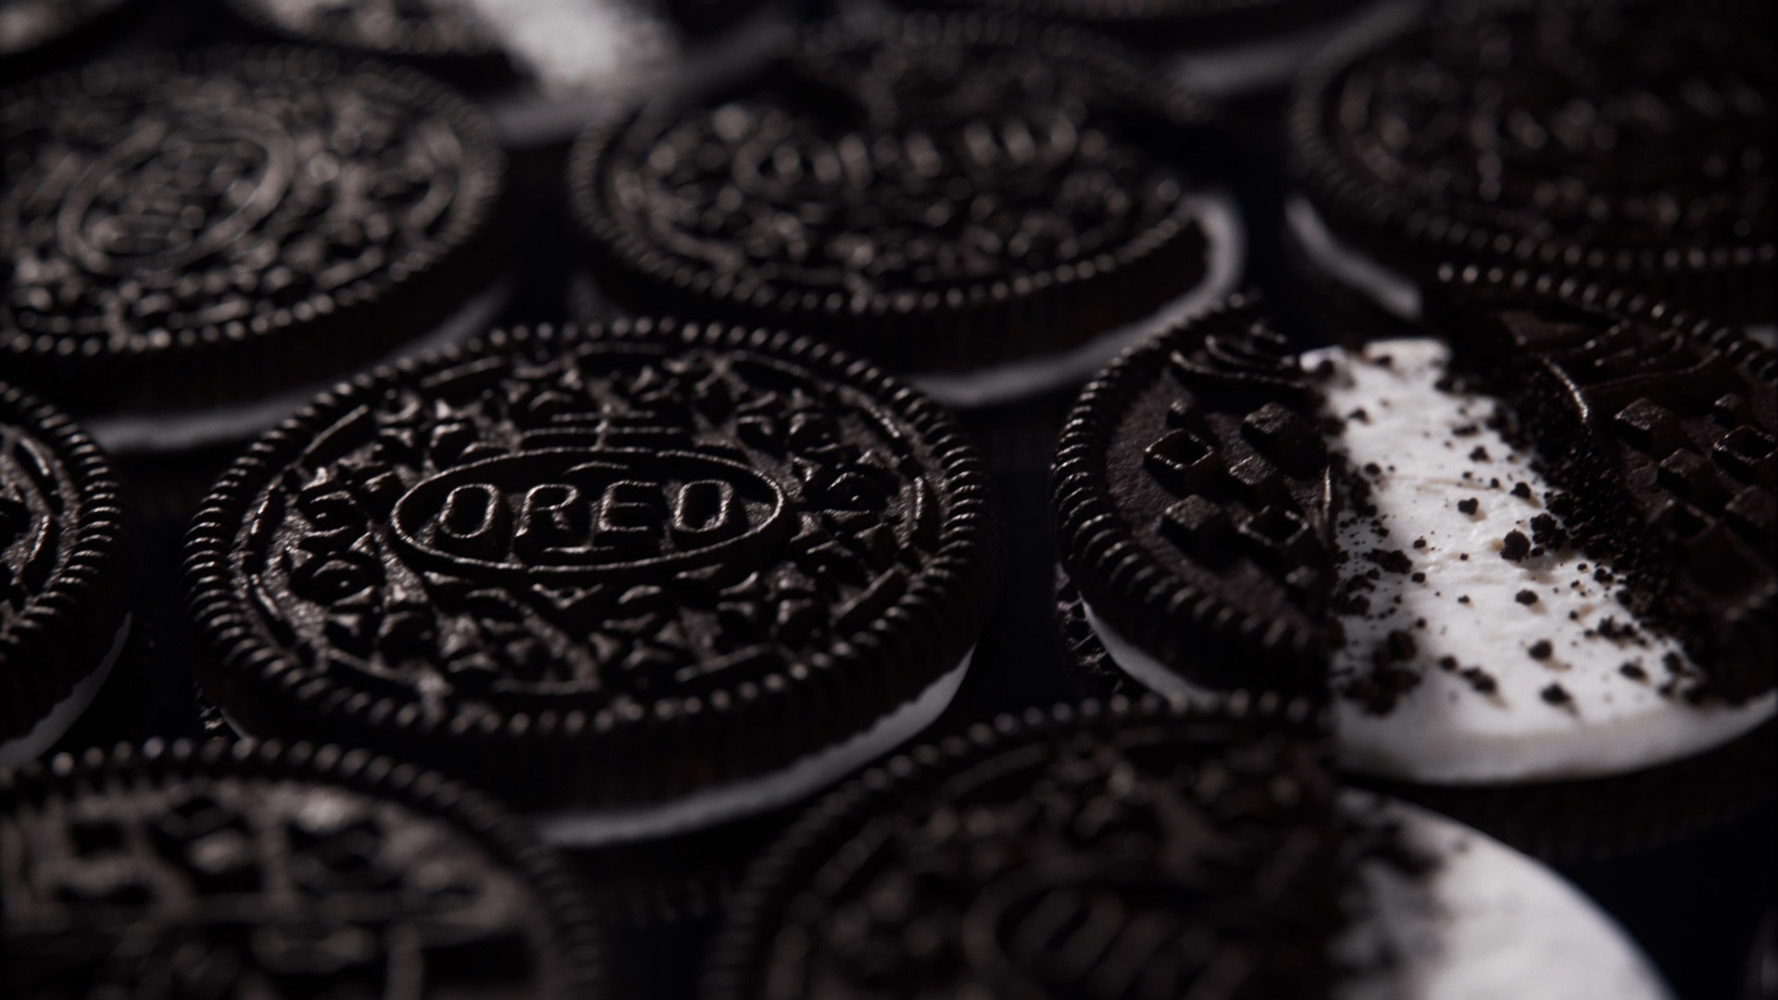 Oreo x Warner Bros - The Batman Limited Special Edition Cookie